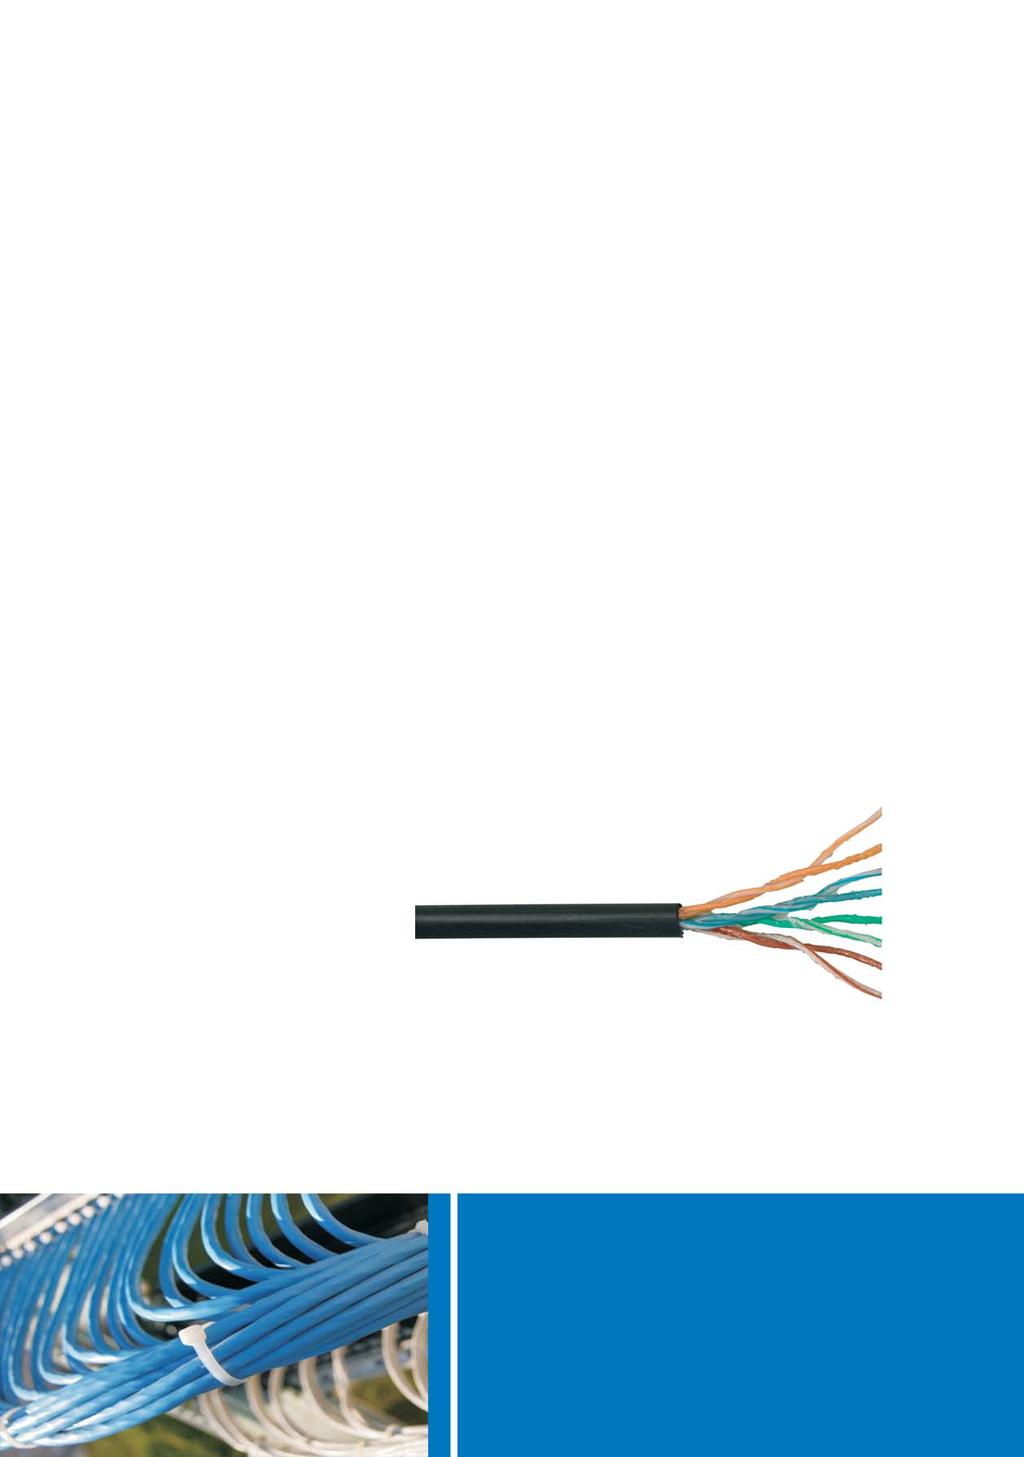 Installation Cable Category 5e U/UTP Outdoor Gel Filled Standards: ANSI/TIA-568-C.2 ISO/IEC 11801 ED.